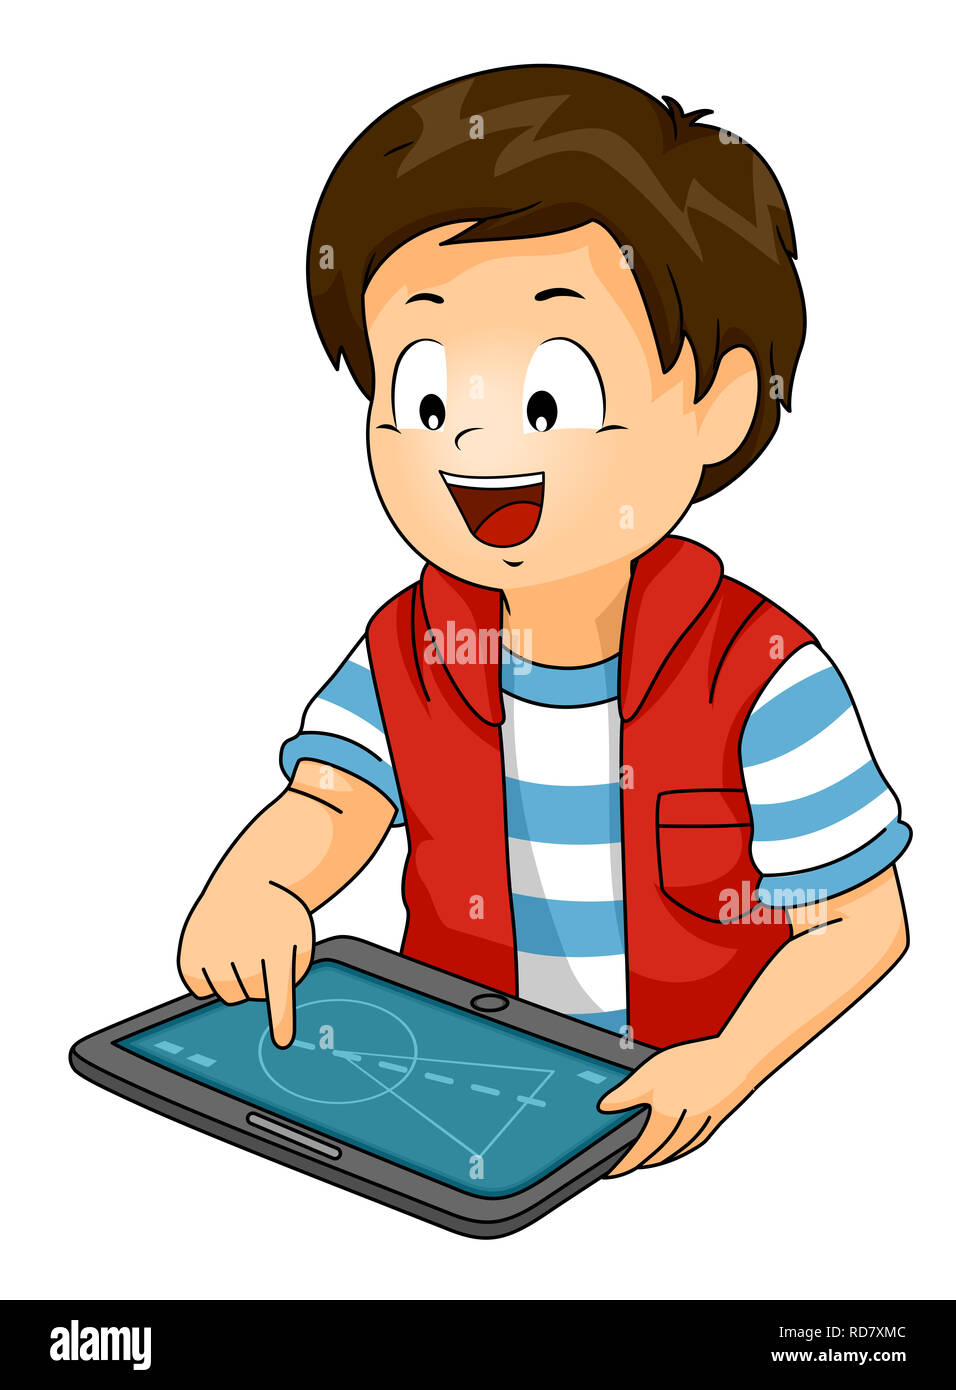 Illustration of a Kid Boy Drawing on His Tablet Computer Screen Using Fingers Stock Photo